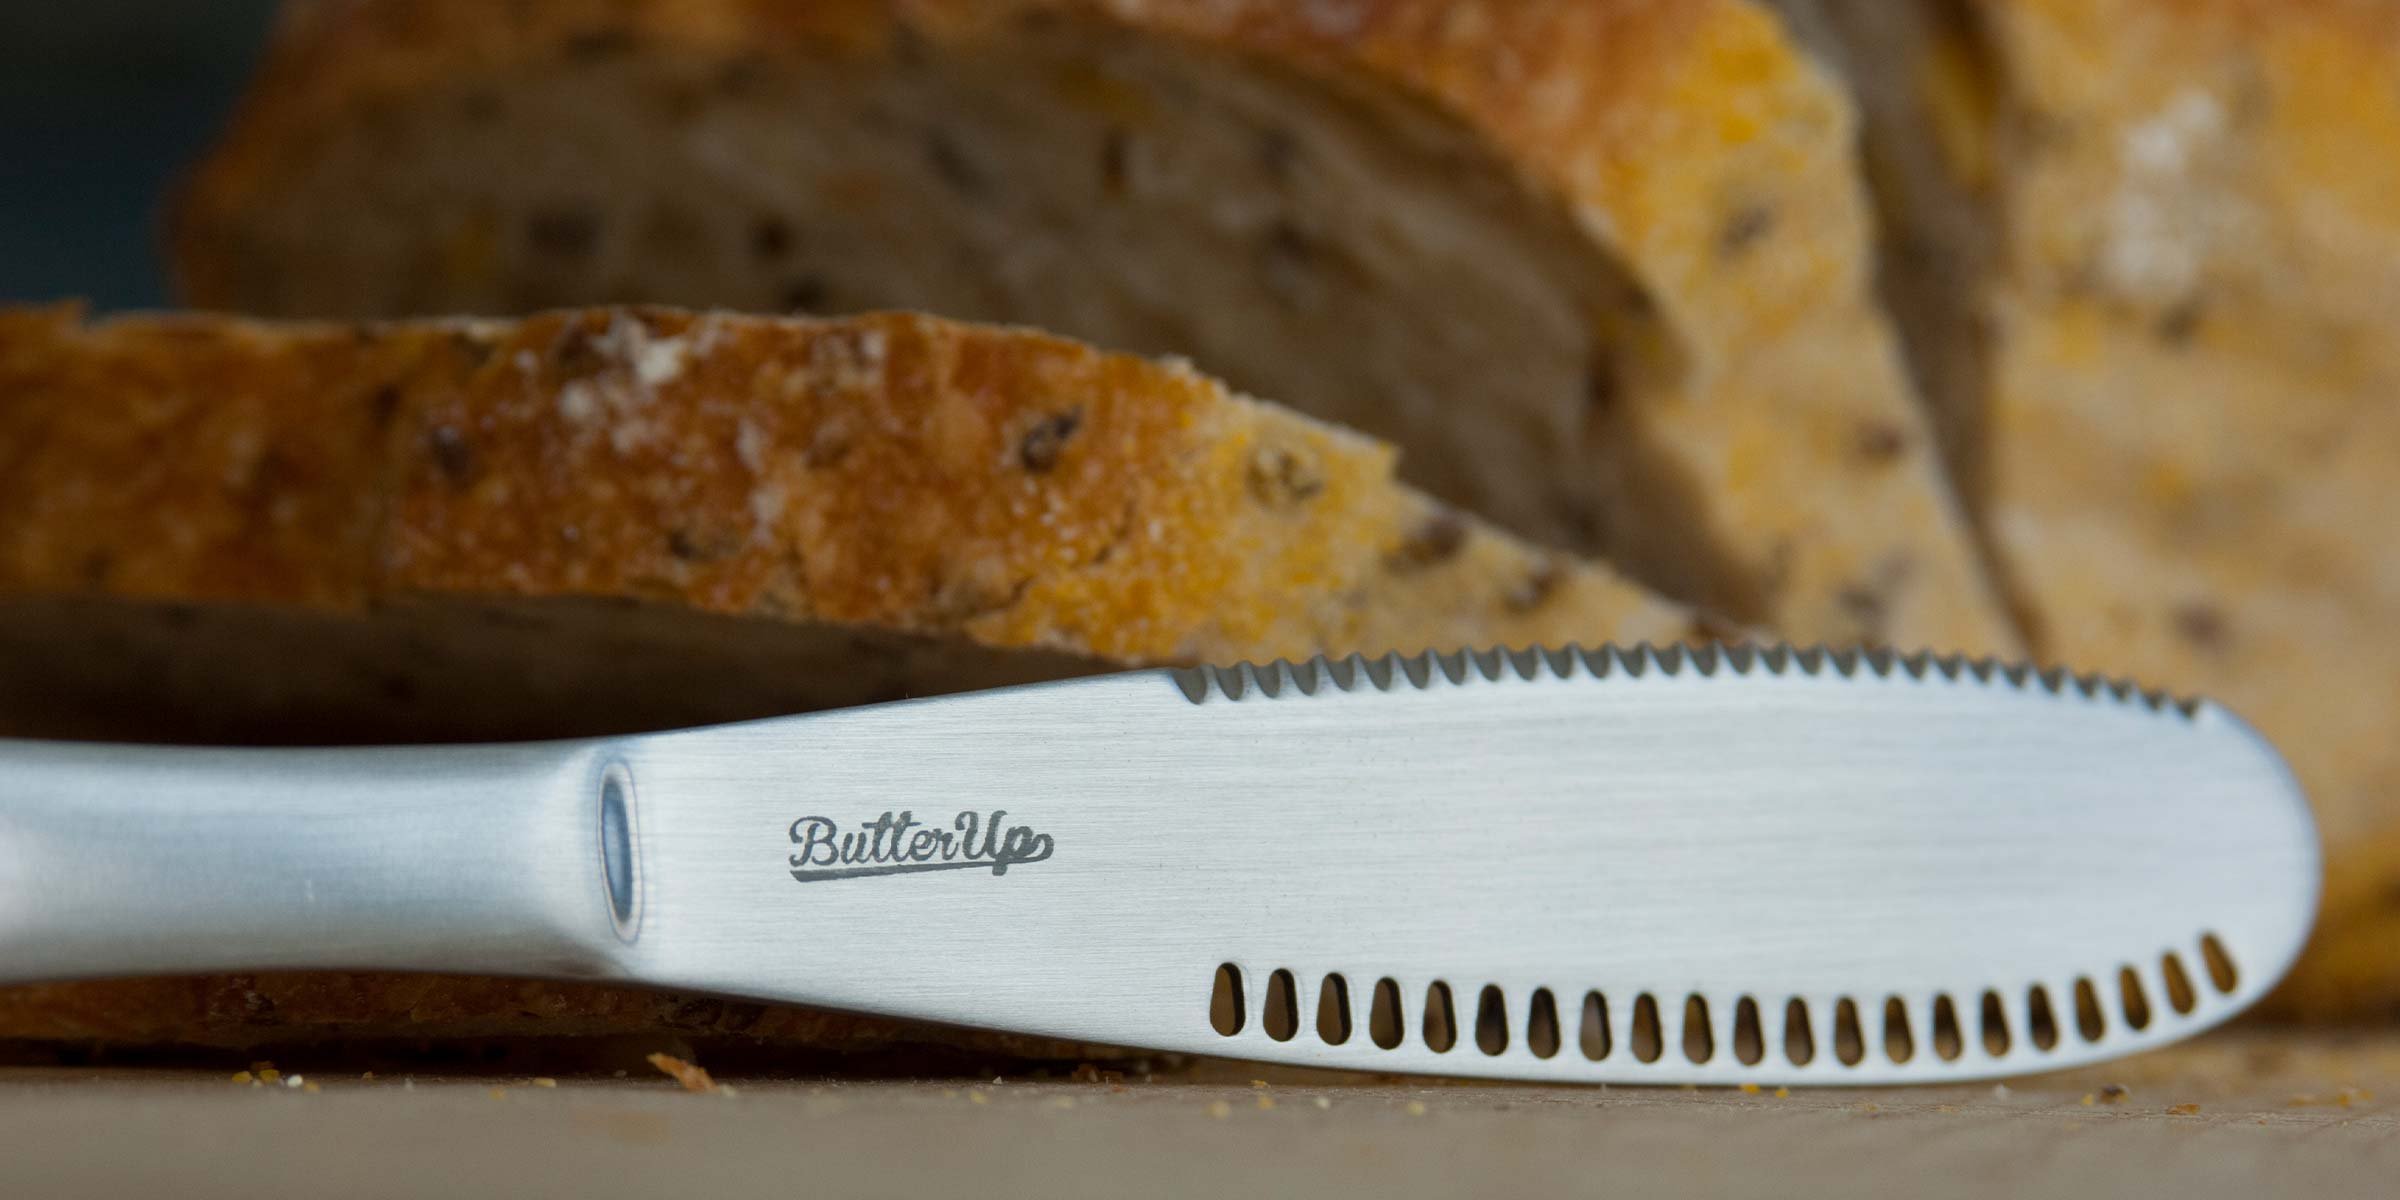 Detailed side view of Butter Up knife with sliced bread in background